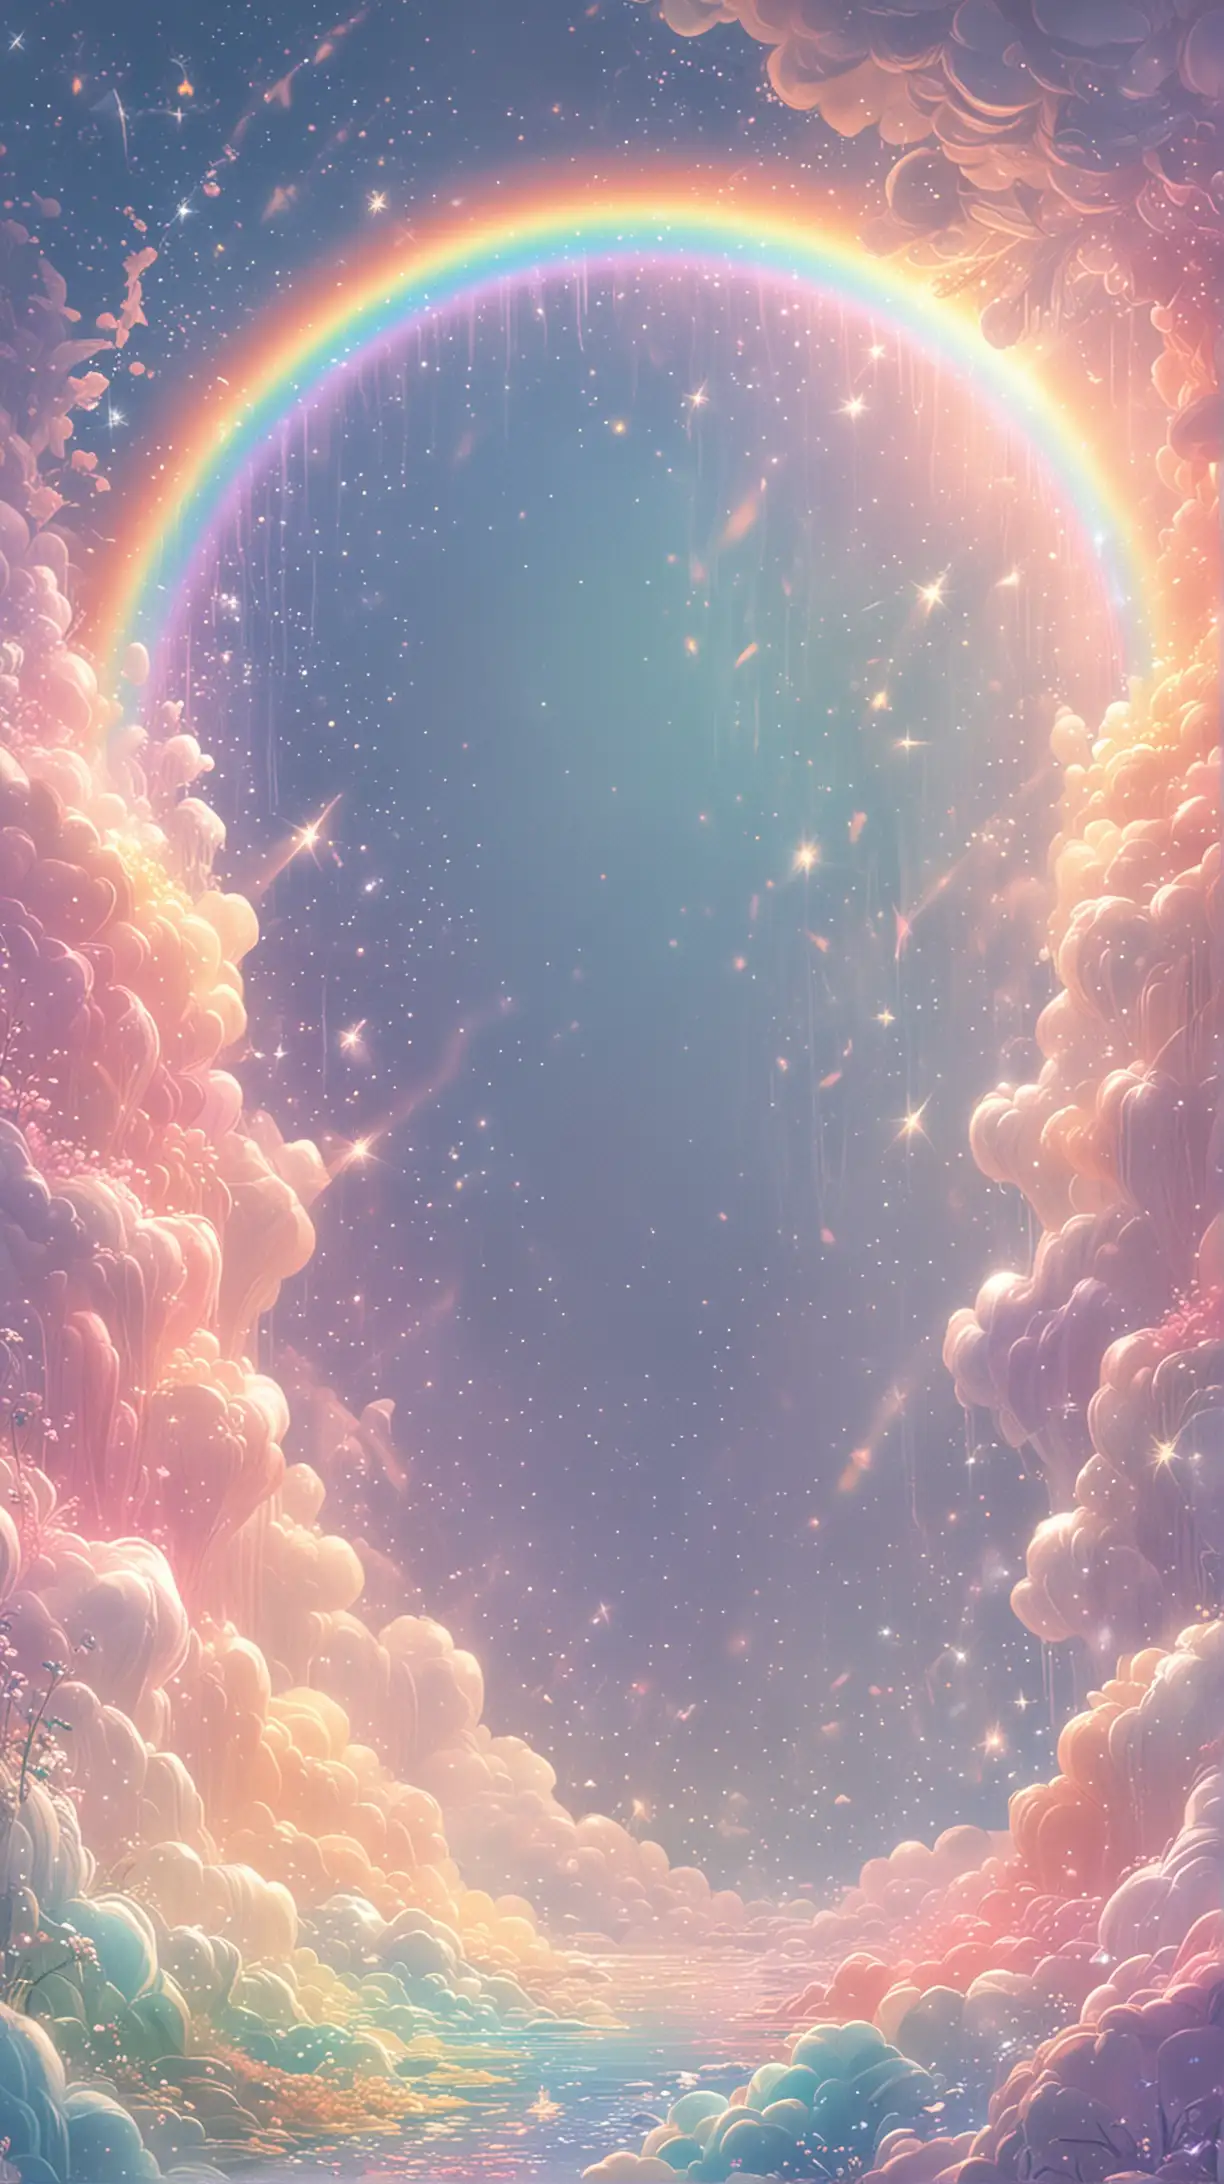 please create magical, ethereal, pastel rainbow, sparkly, transcendent, background artwork